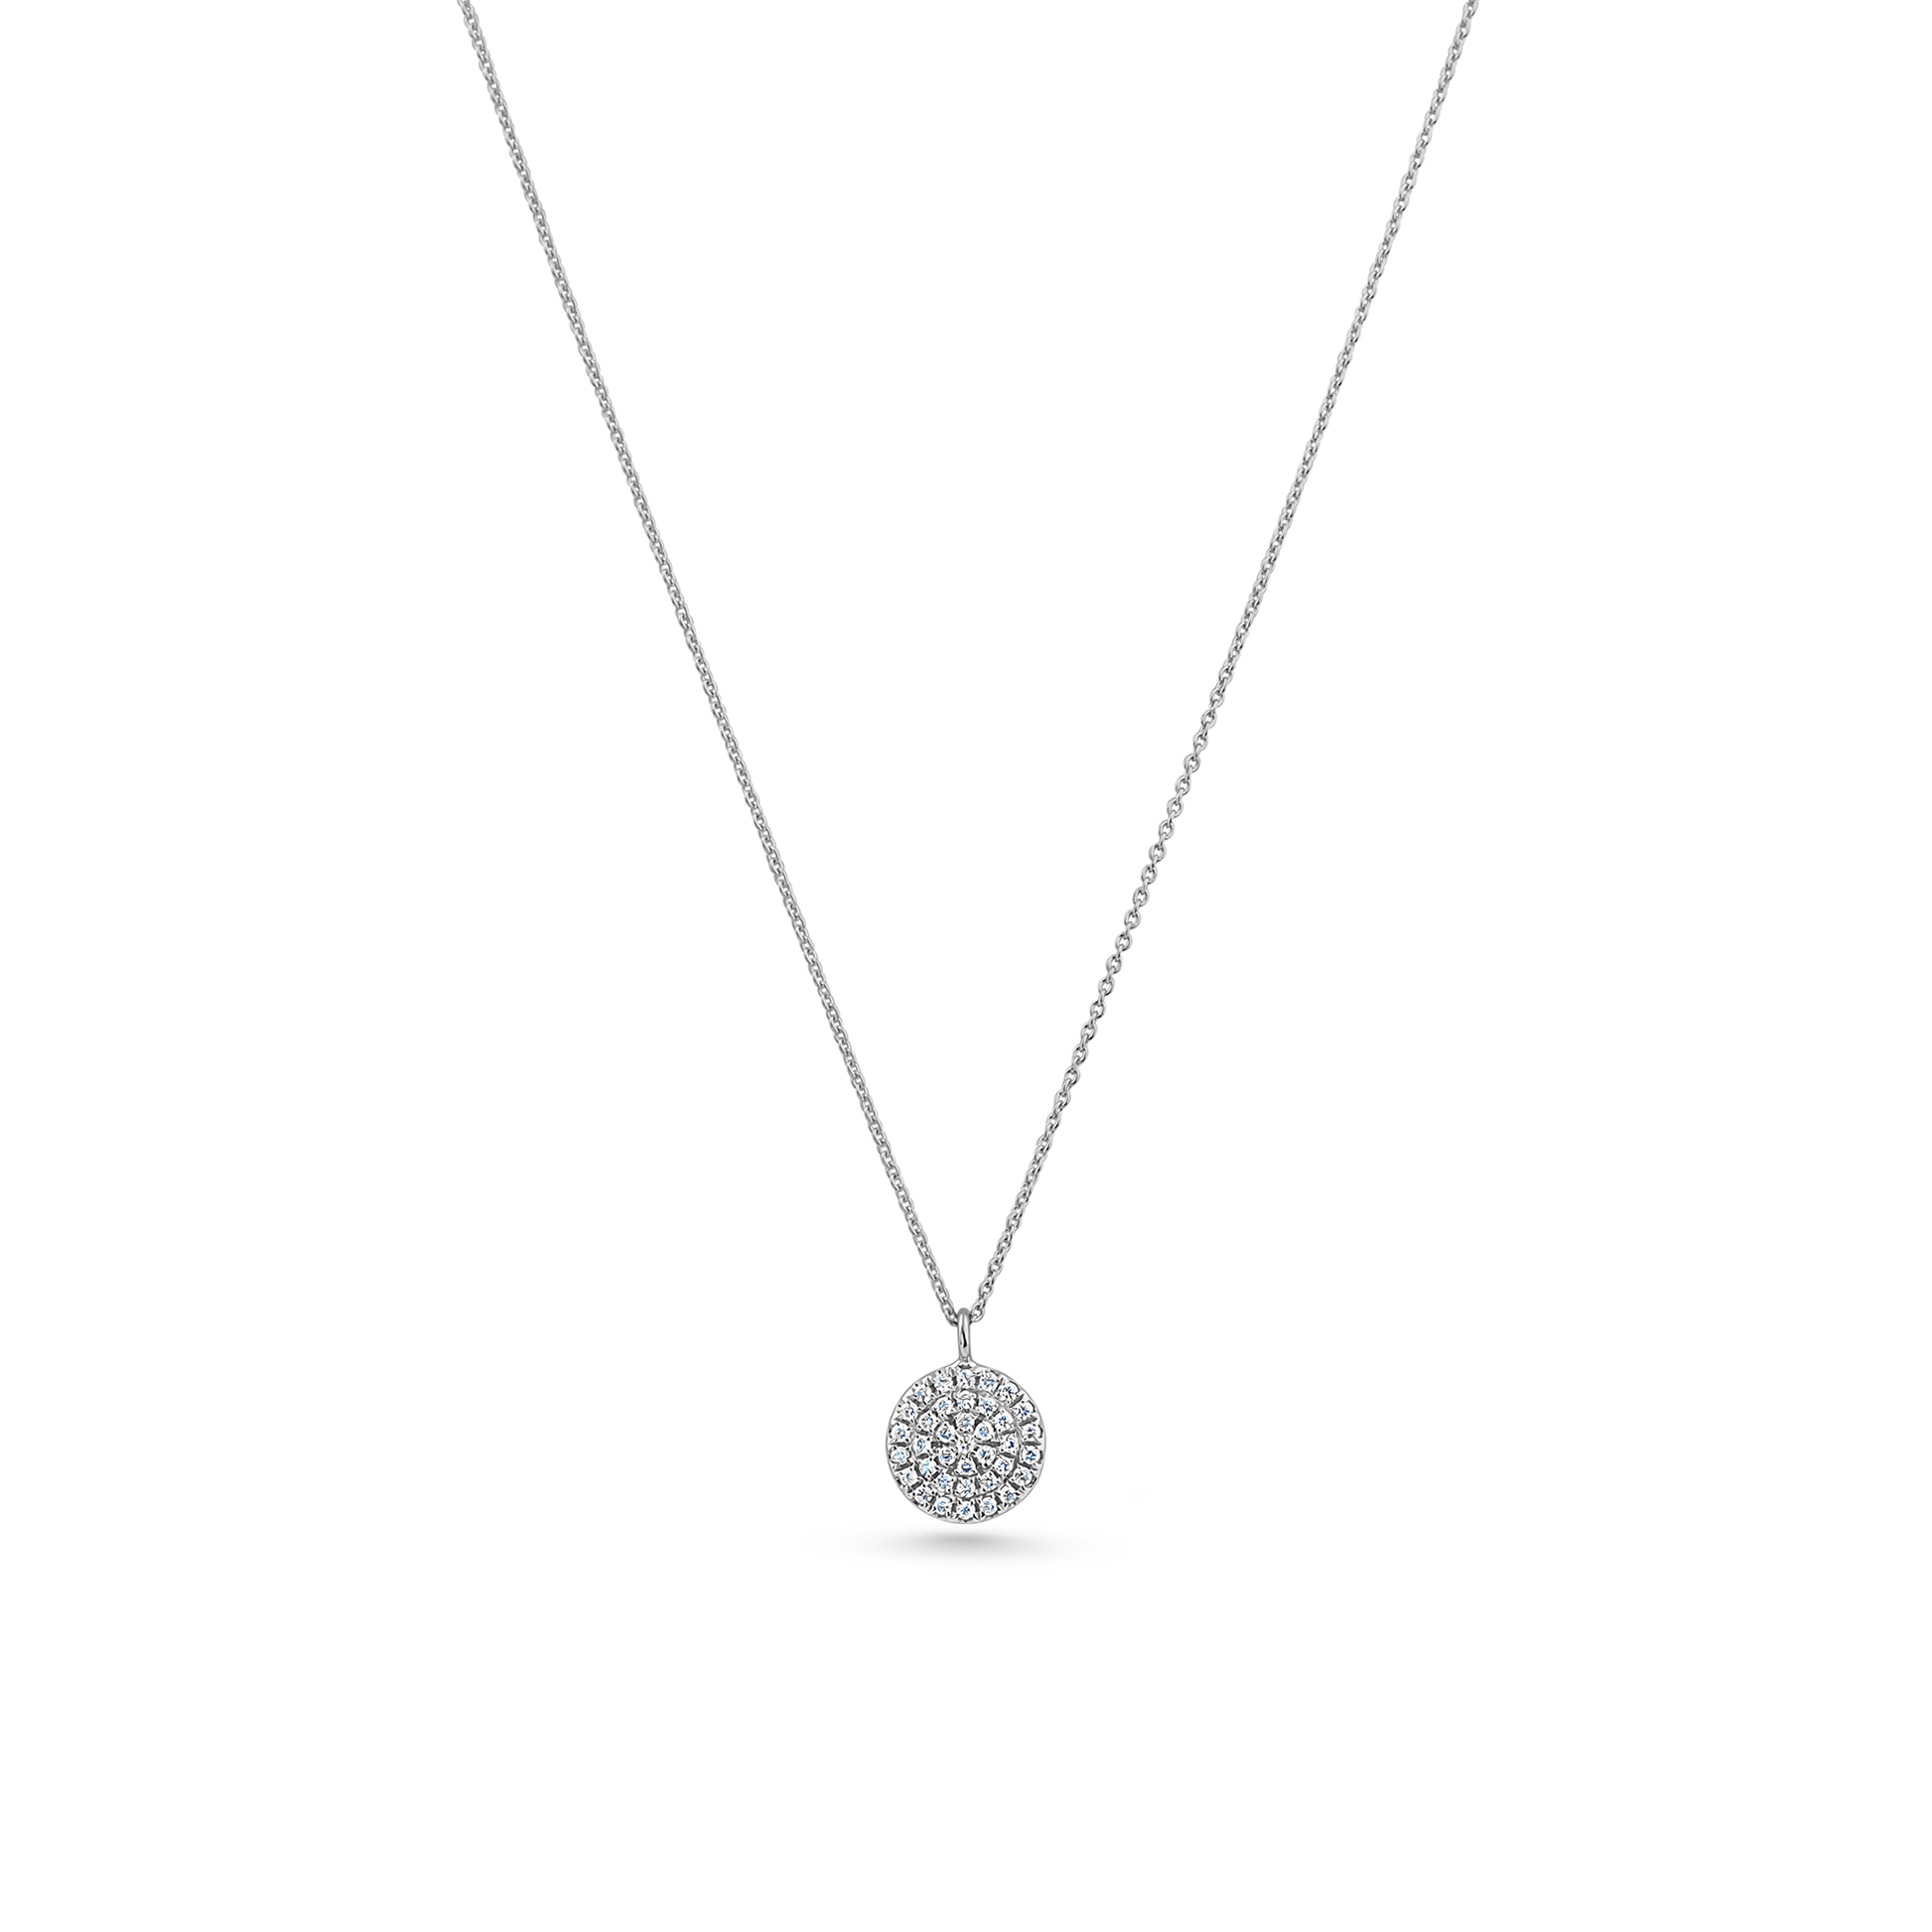 Oliver Heemeyer round tag diamond pendant made of 18k white gold. Pendant on a chain.